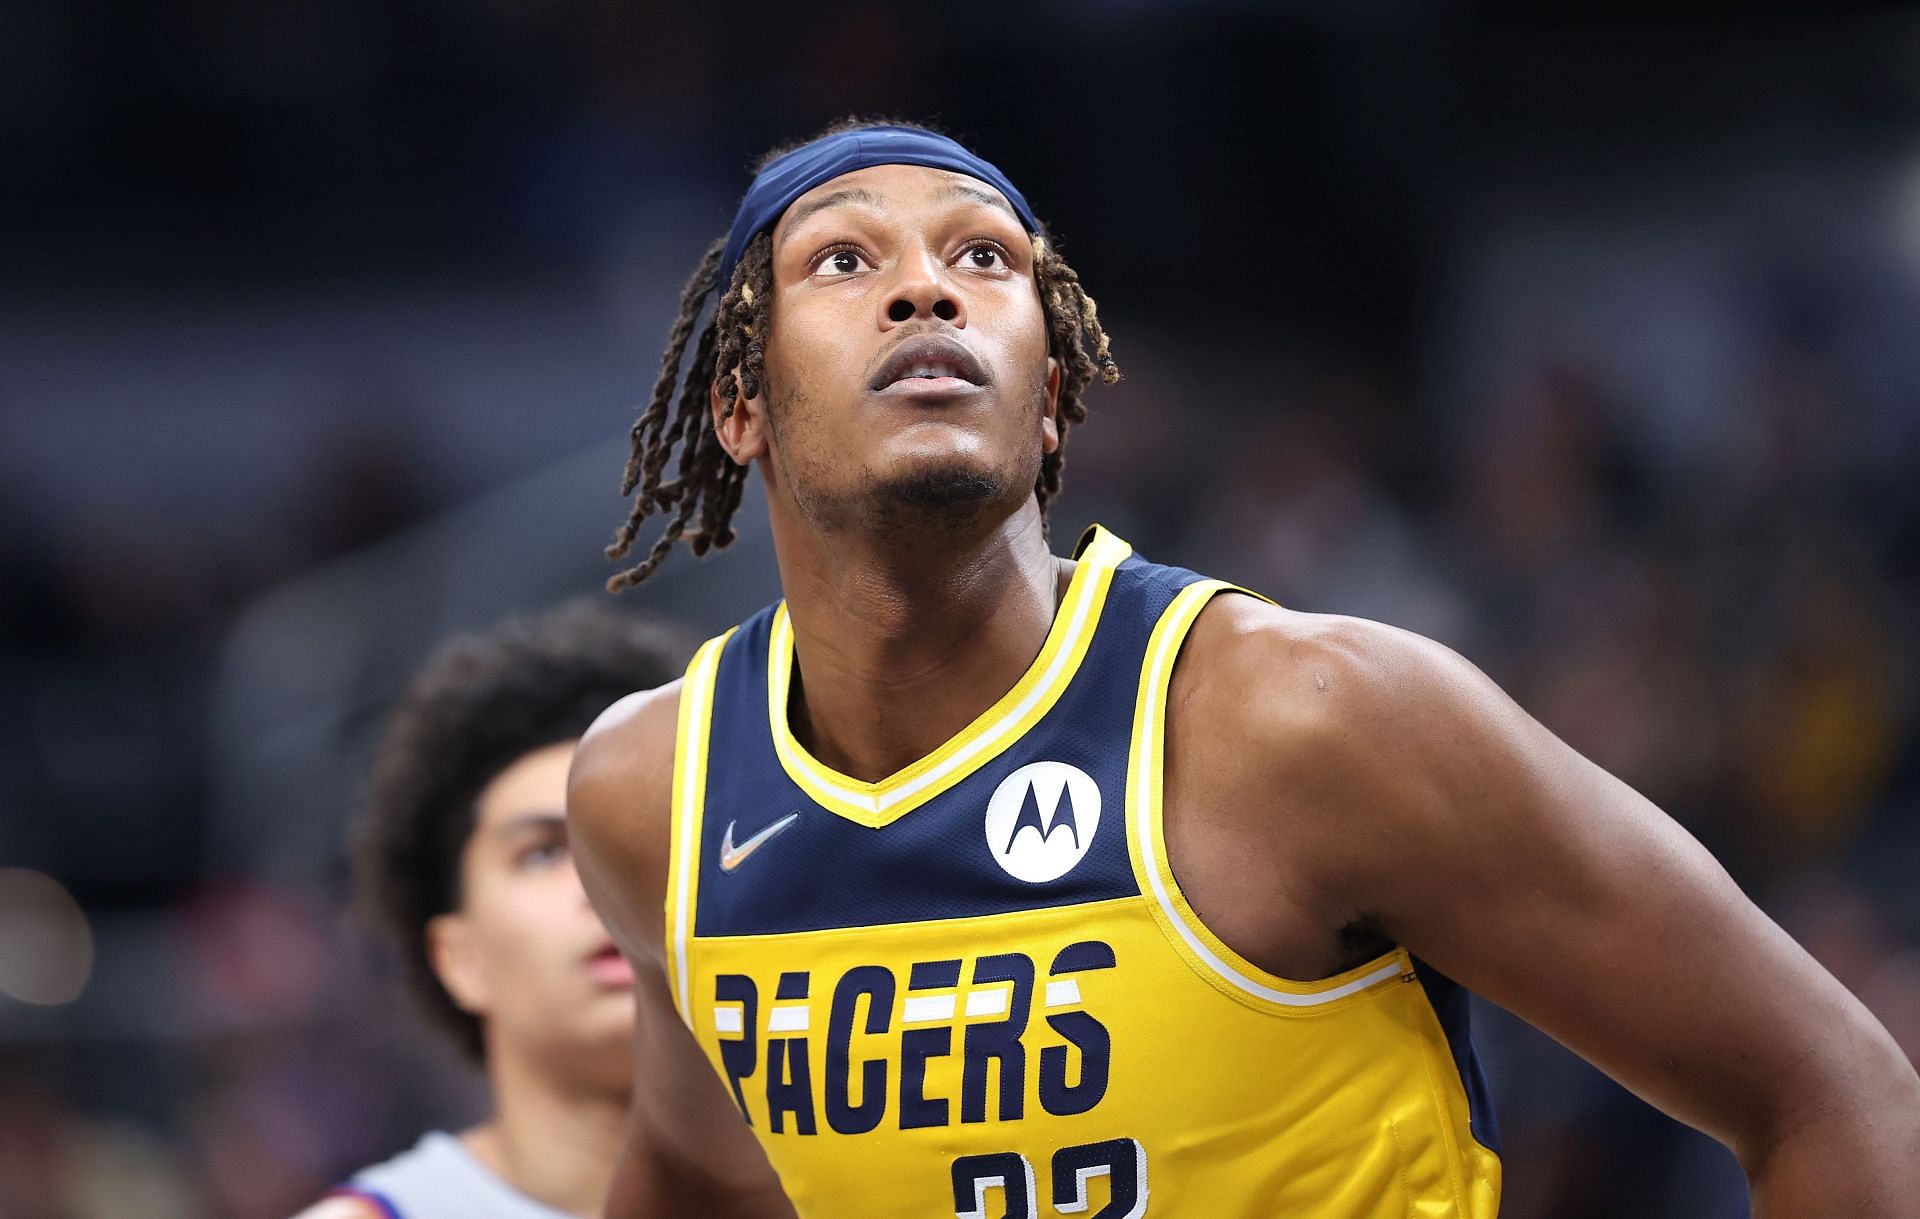 Myles Turner is one of the top rim protectors in the league.